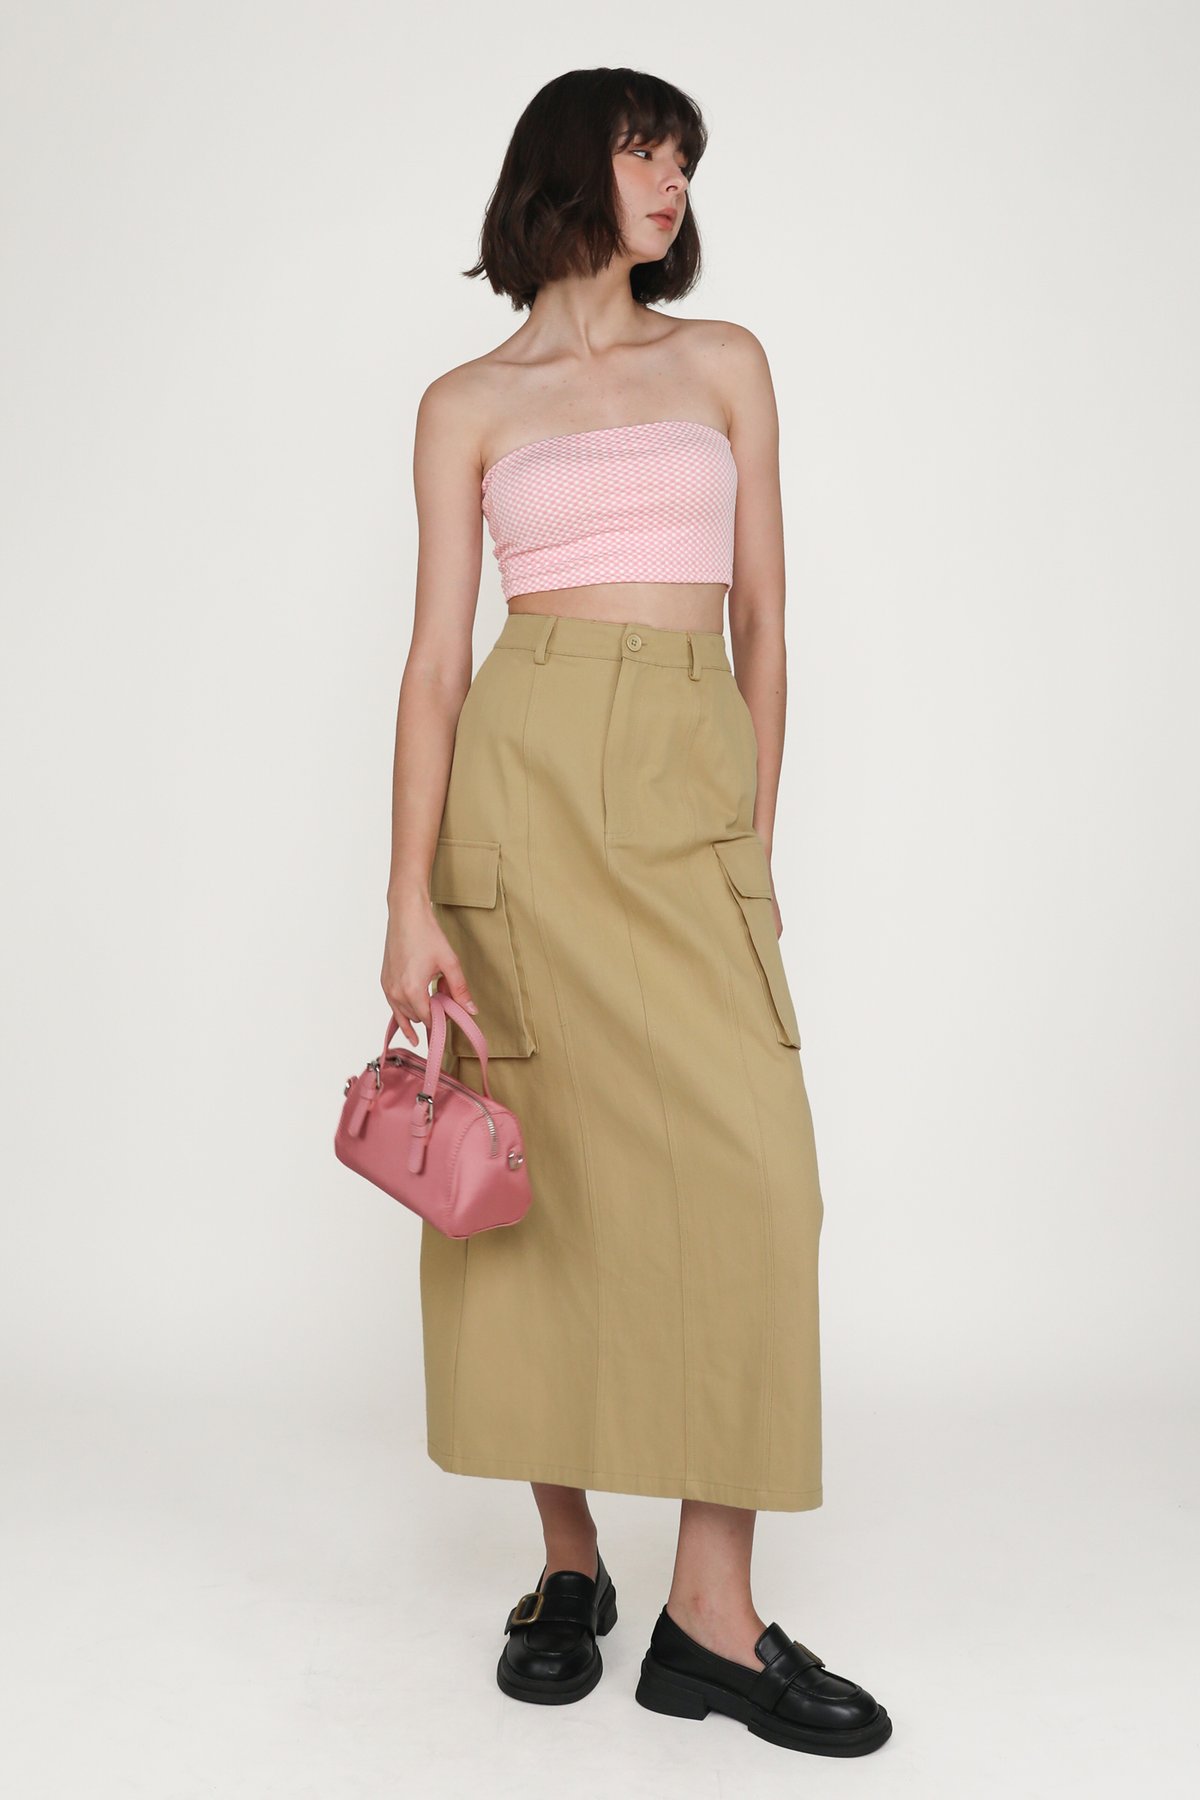 Kendie Basic Tube Padded Top (Strawberry Cream) Limited Edition